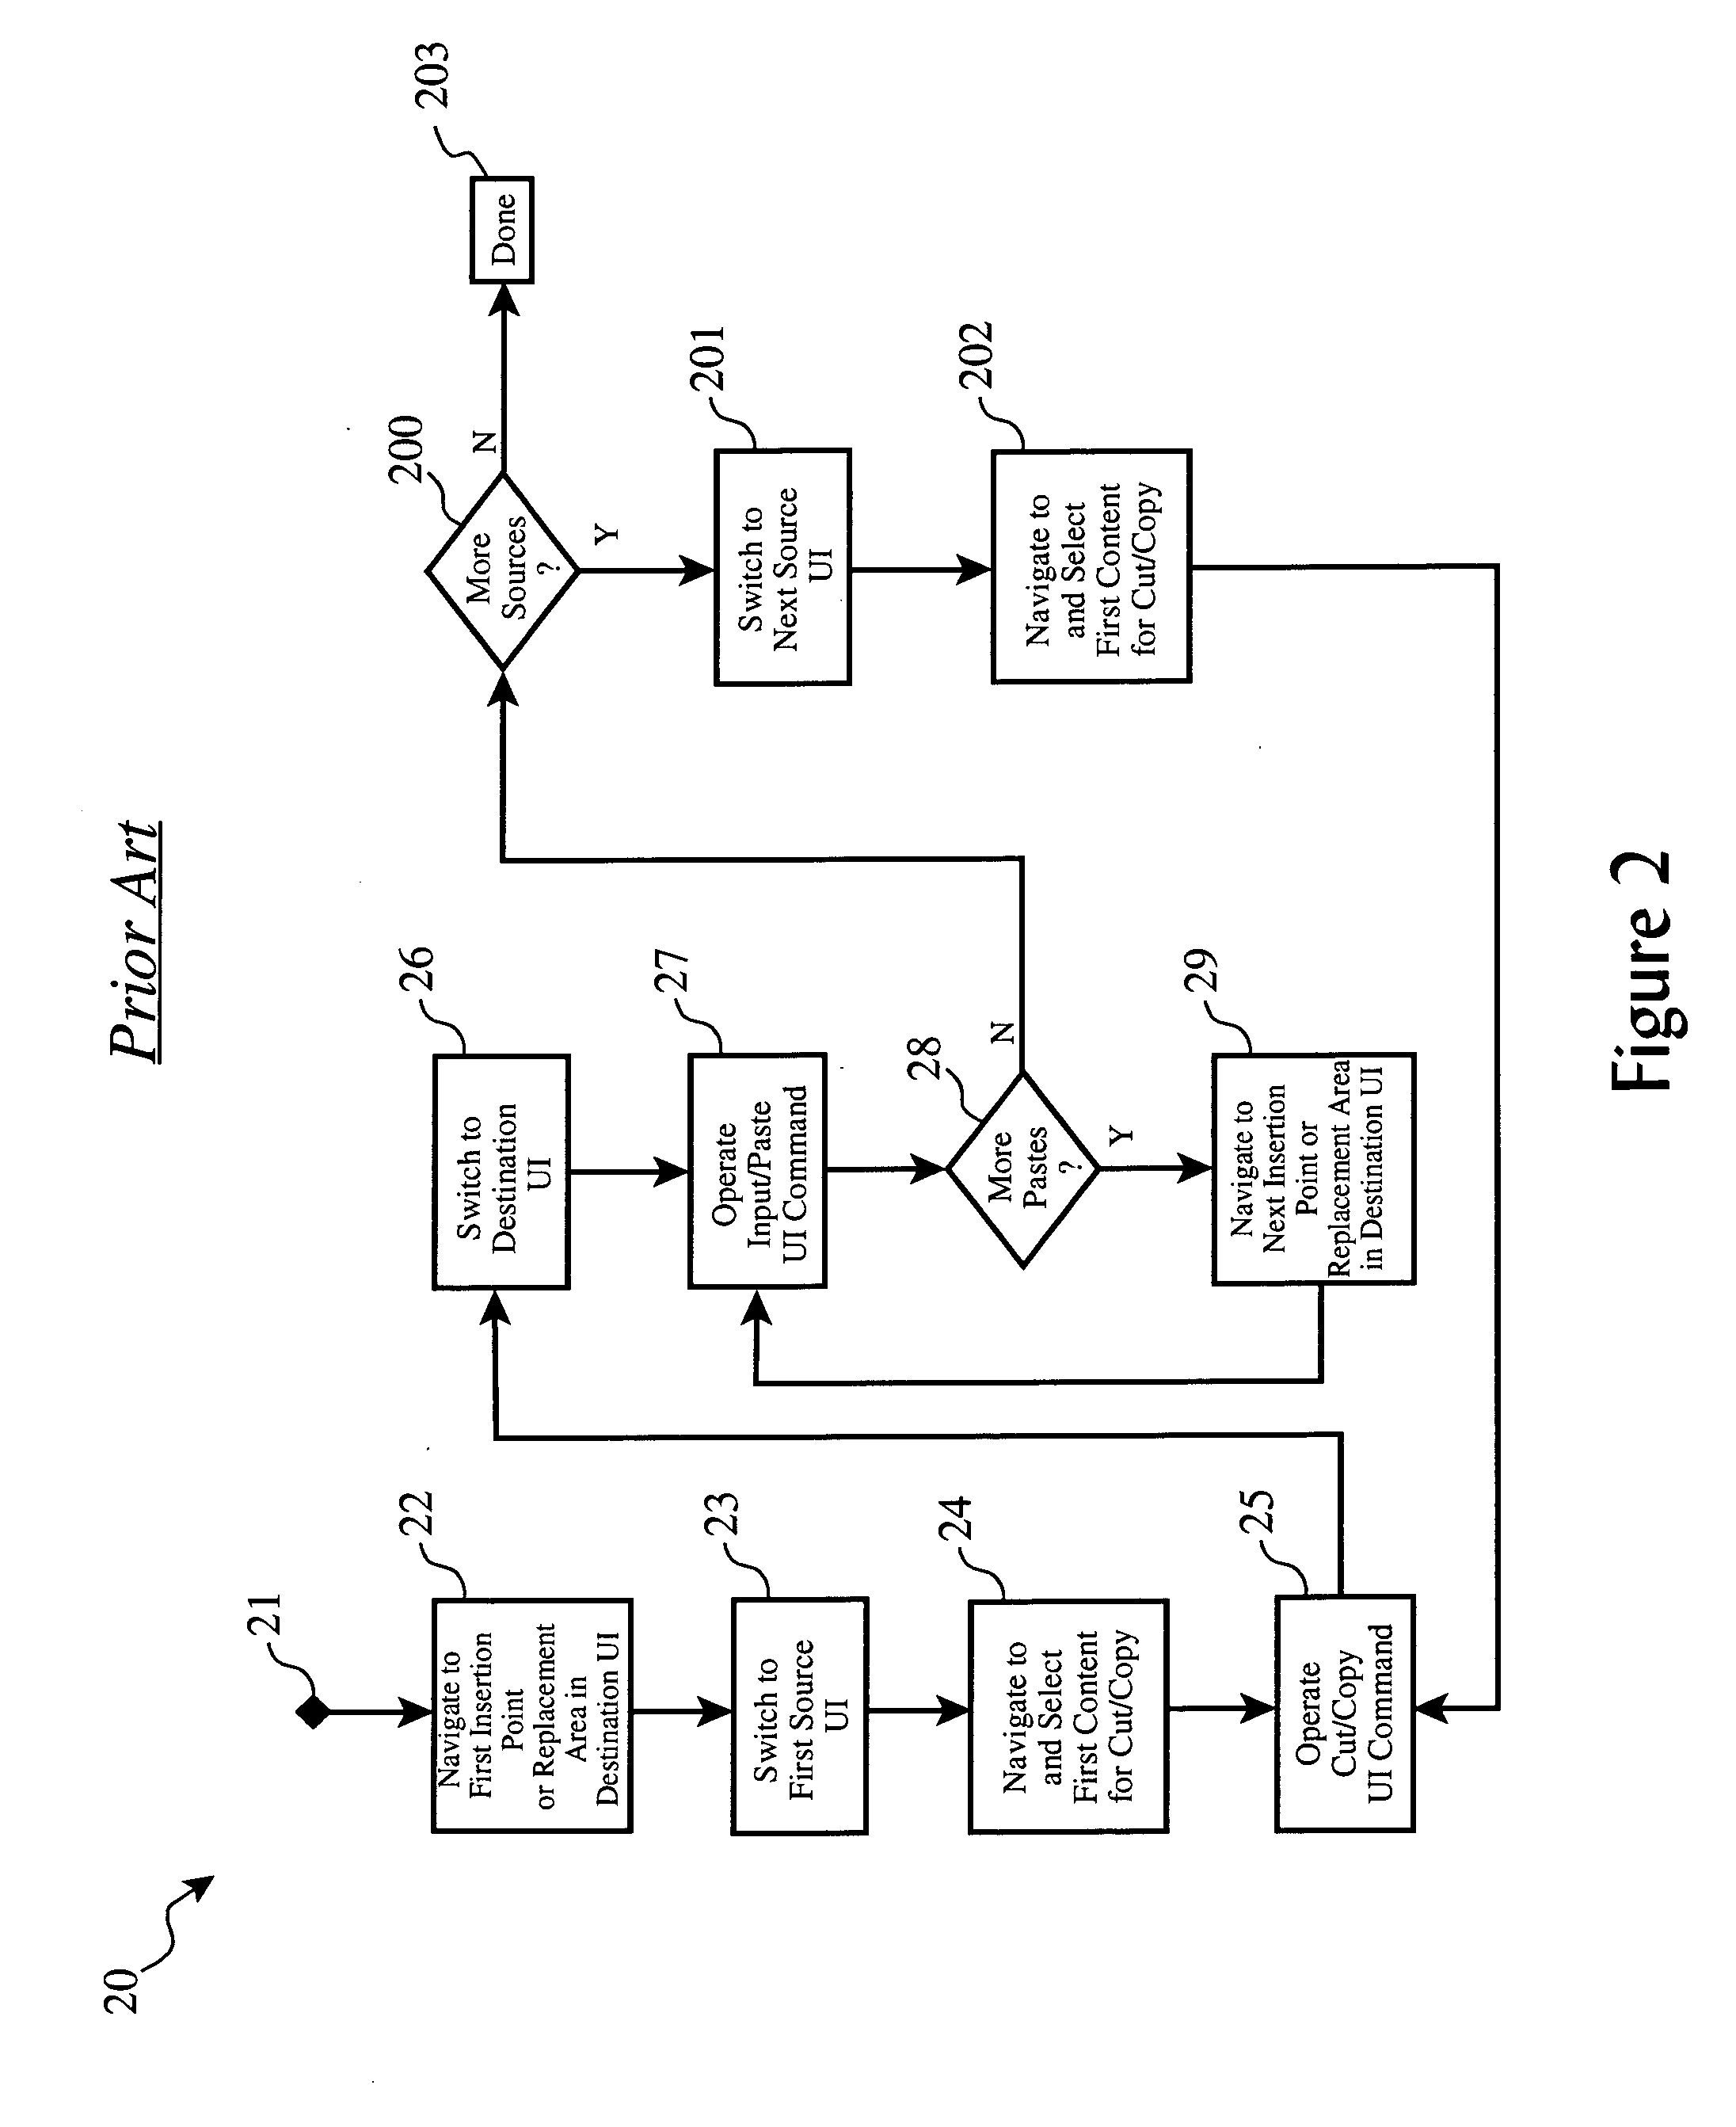 System and method for automatic information compatibility detection and pasting intervention